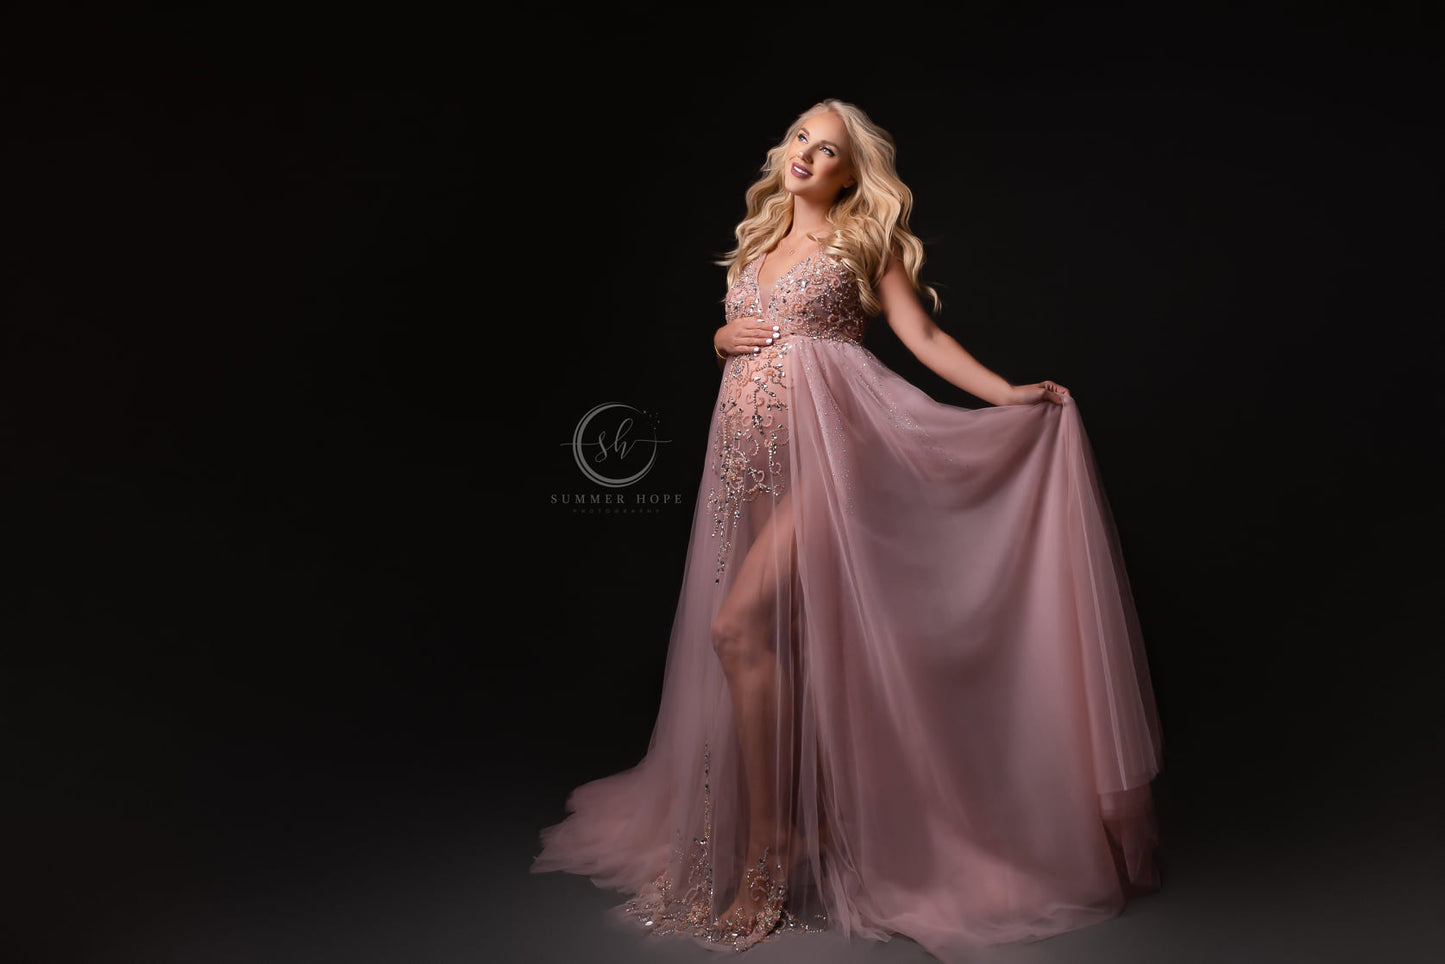 Pink Kissing Sunlight Gown - maternity photoshoot dress